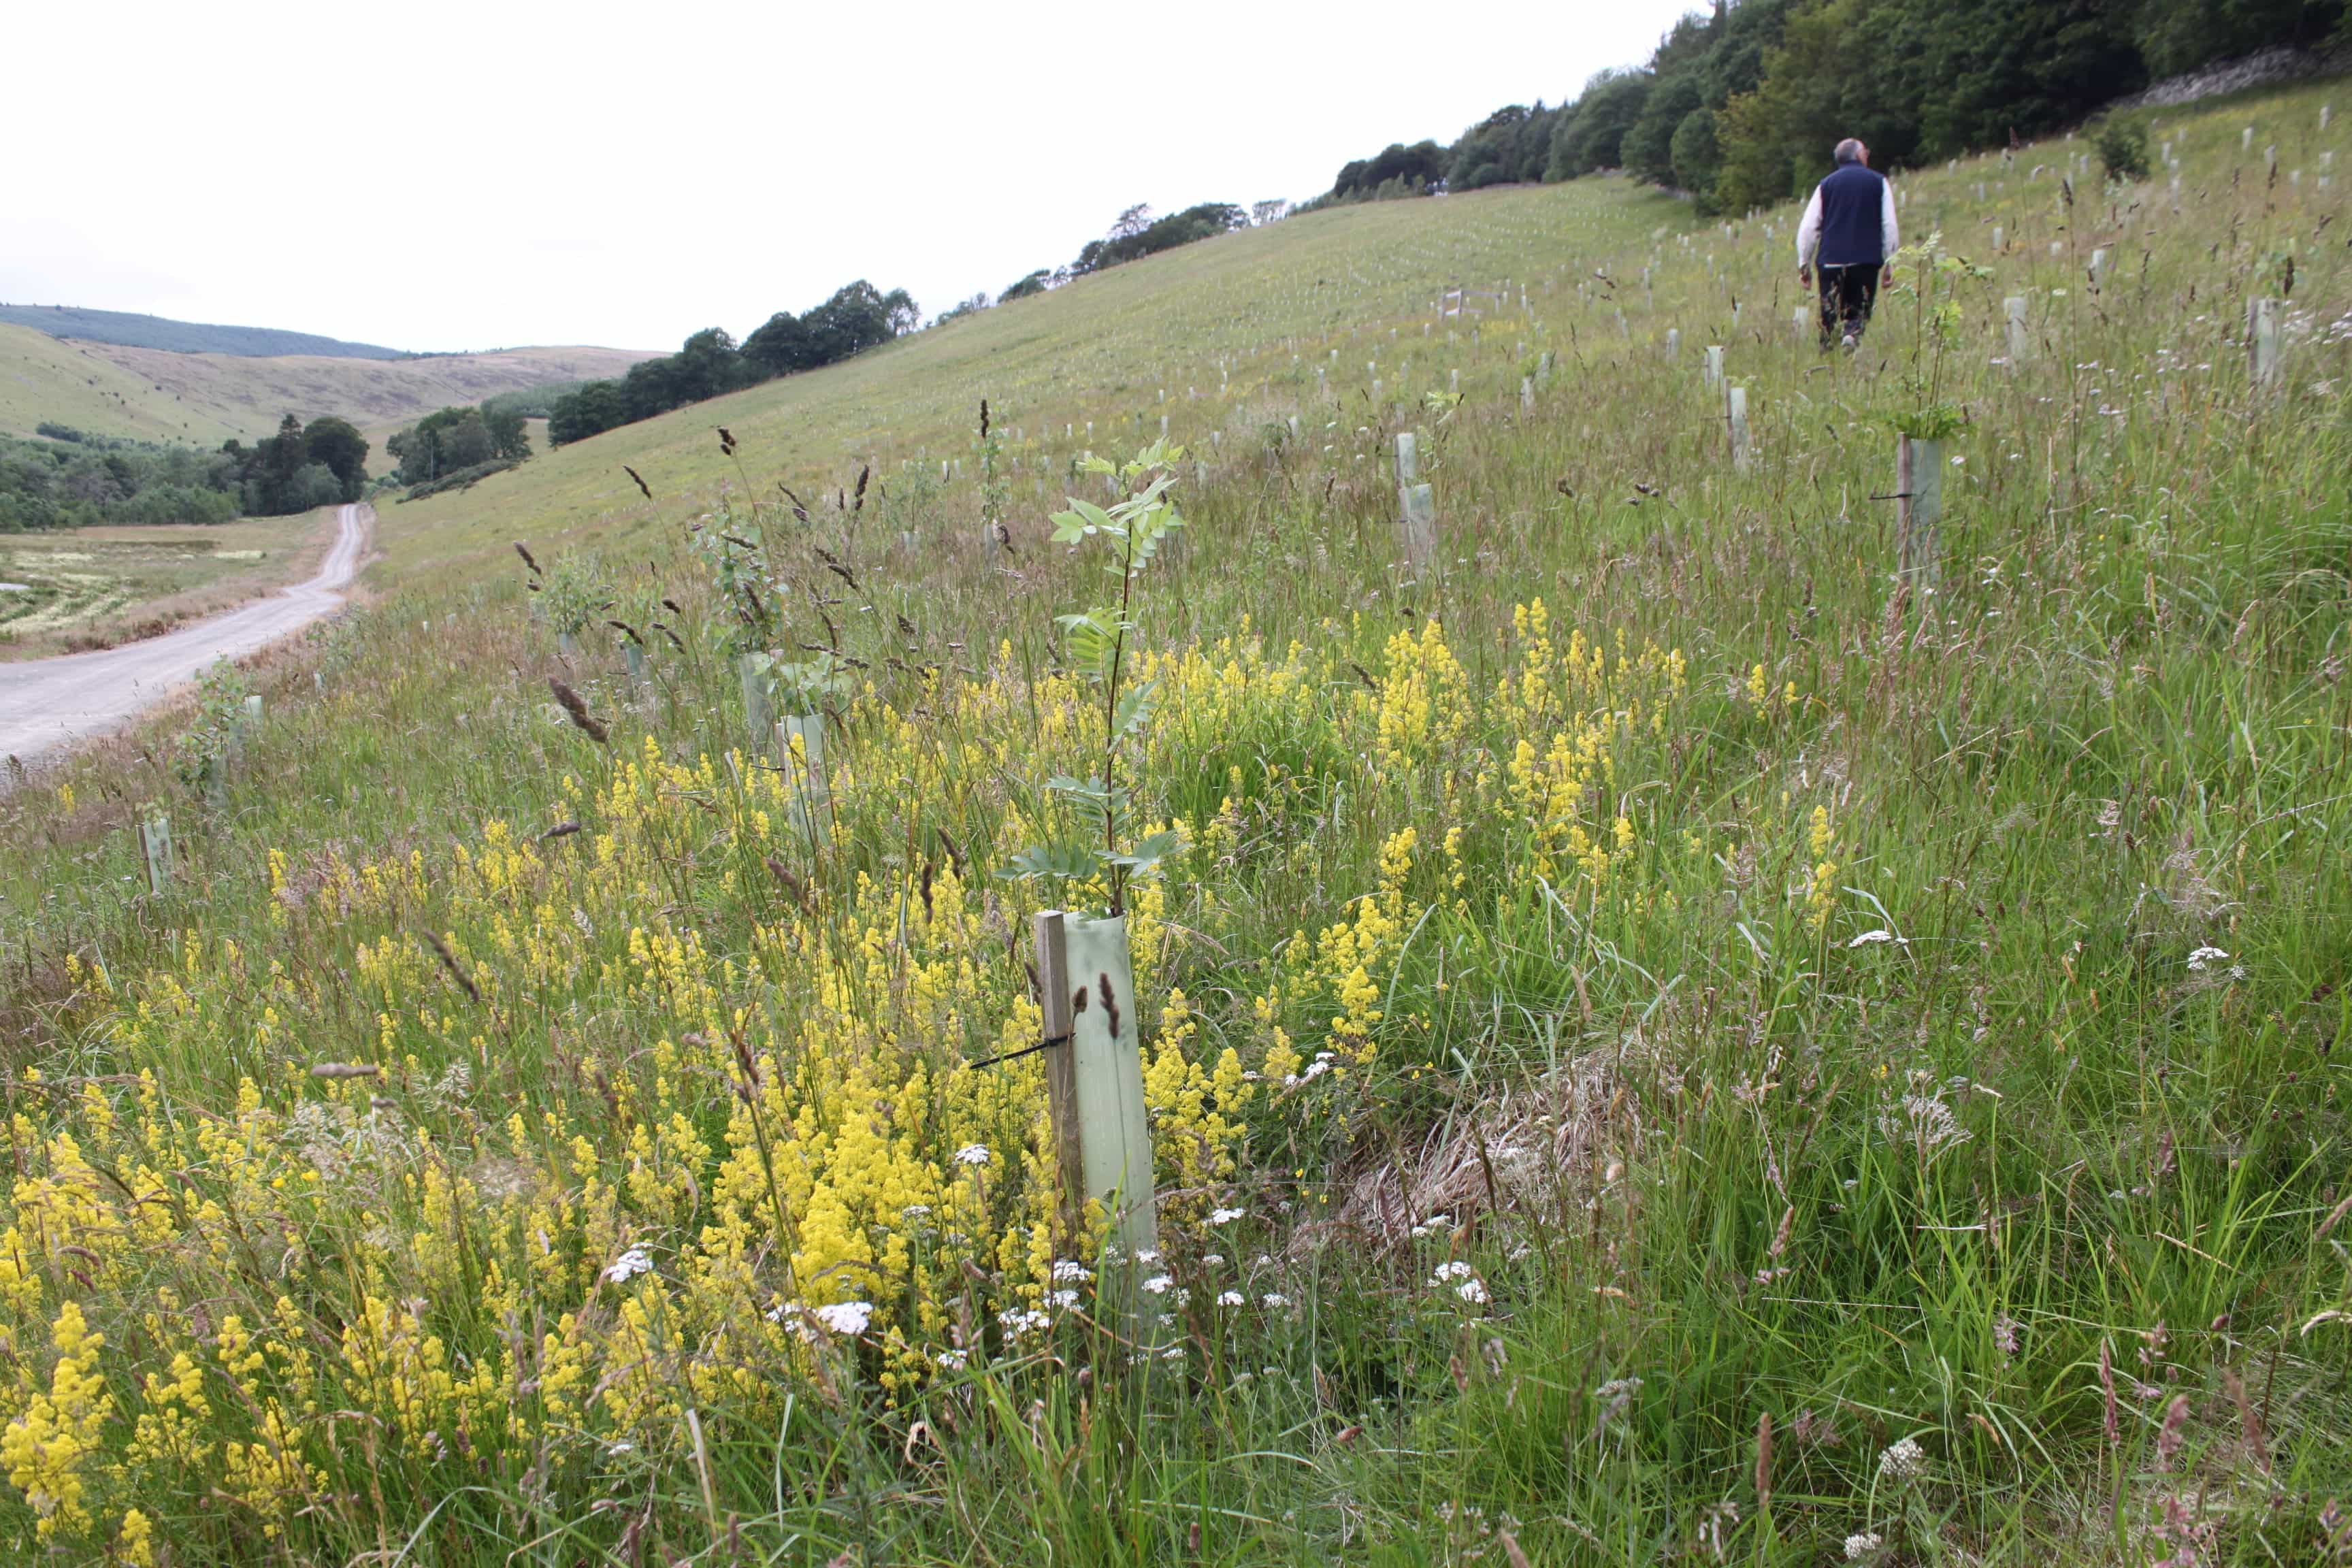 Broadleaves near entrance where there was no ground preparation to reduce the impact of planting on wild plands and herbs